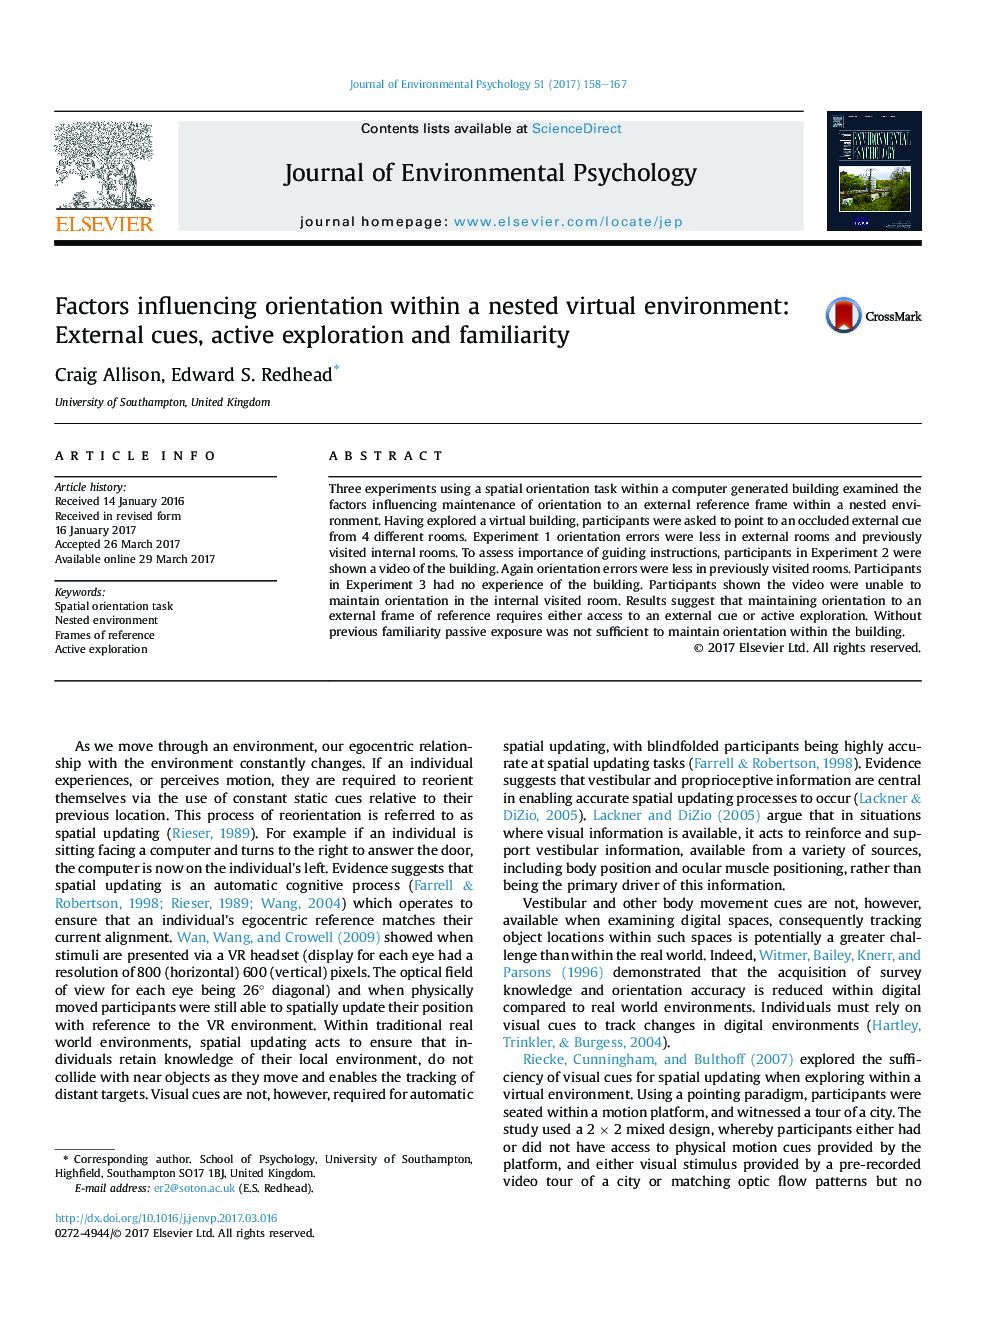 Factors influencing orientation within a nested virtual environment: External cues, active exploration and familiarity